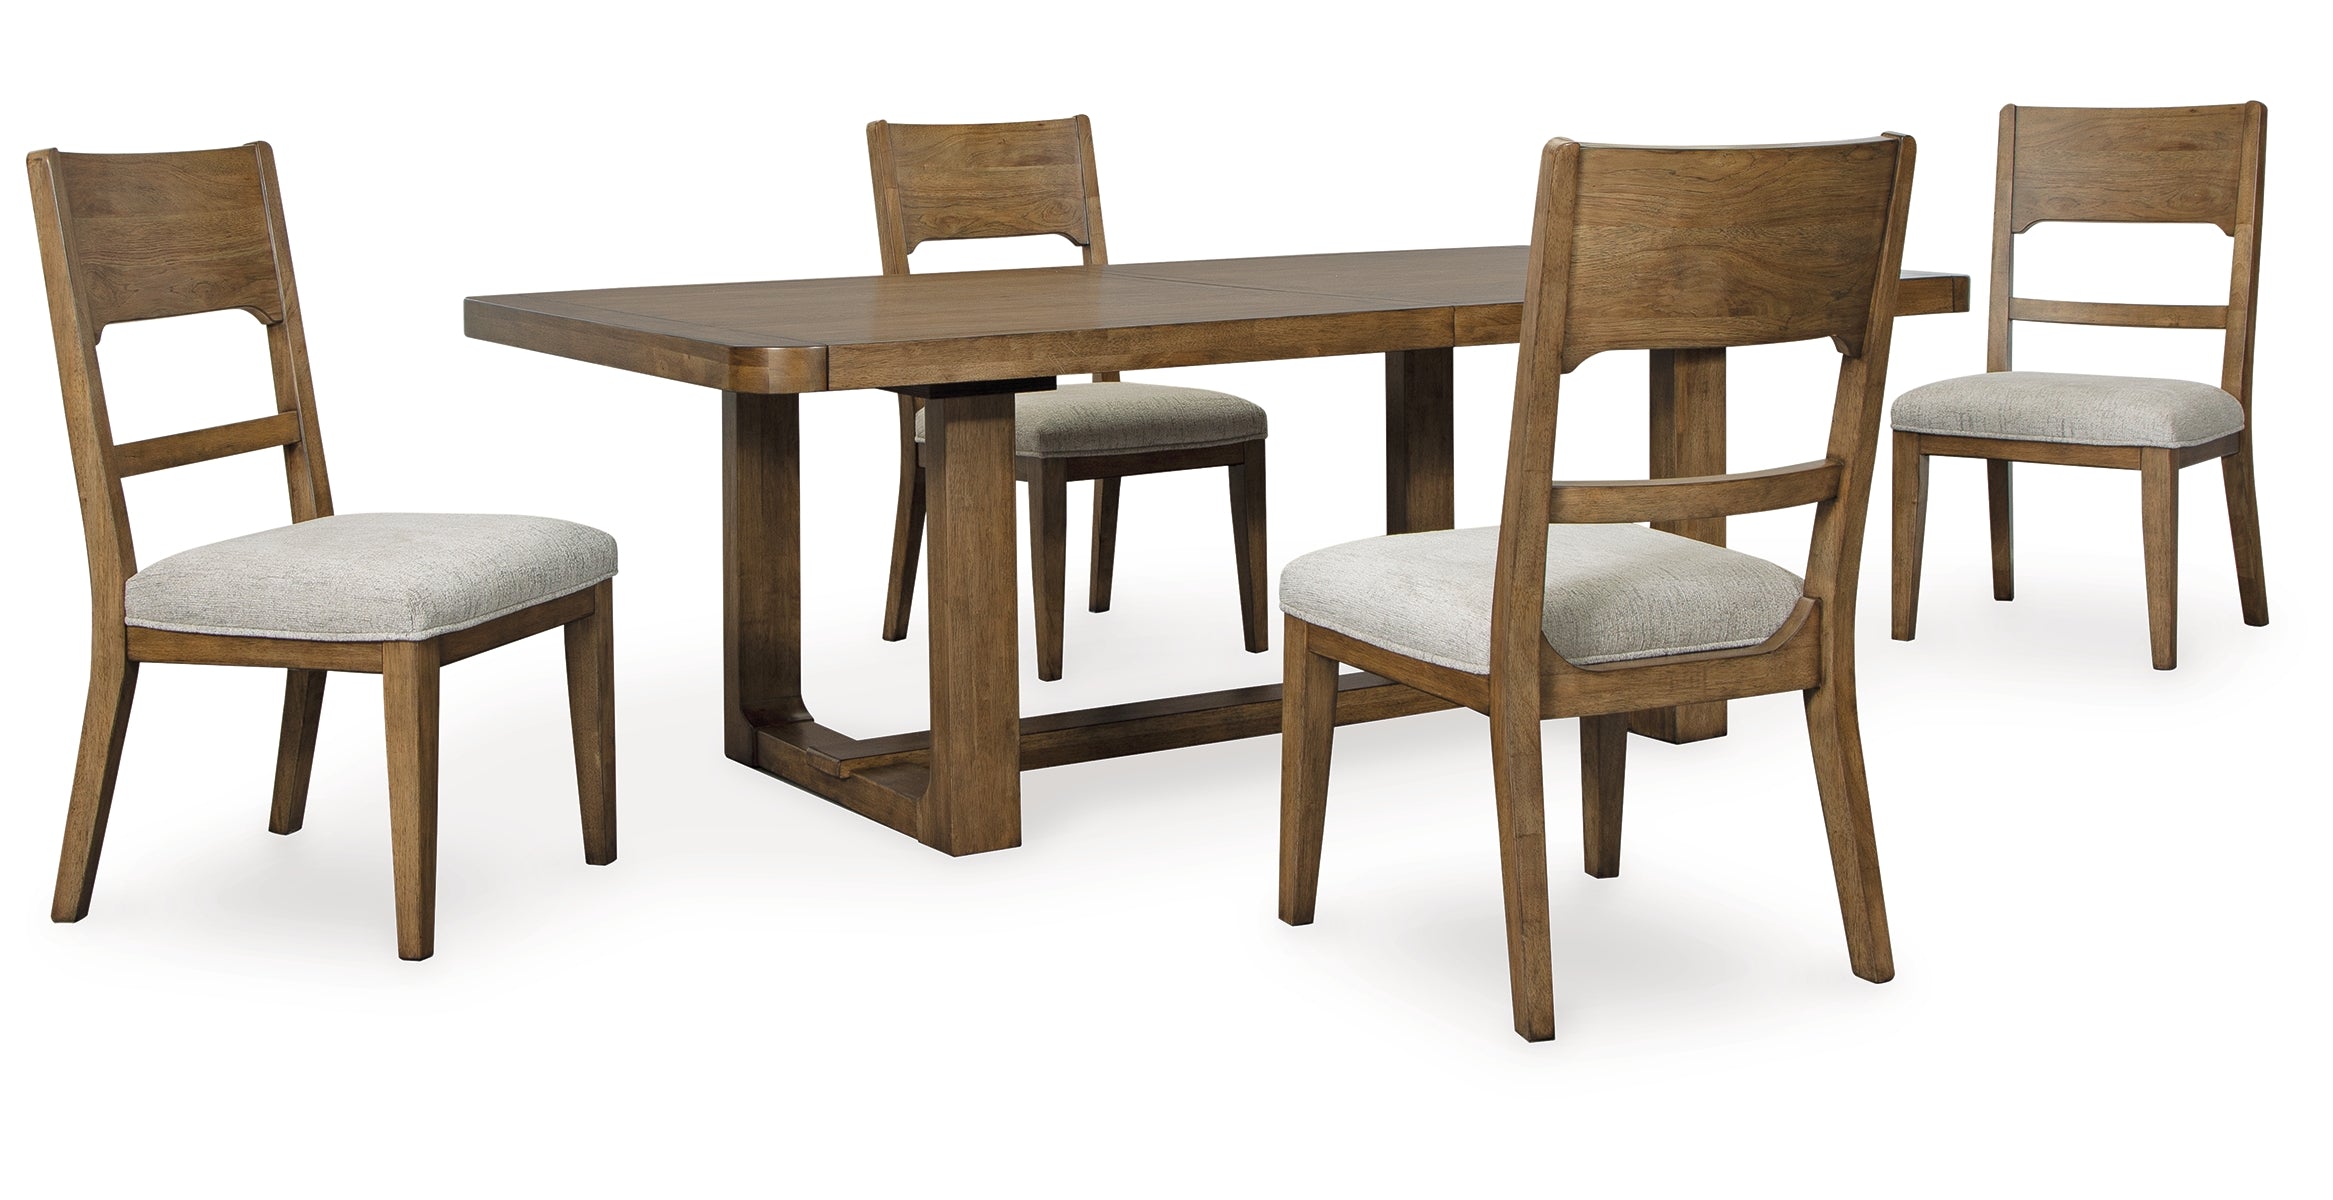 Cabalynn Dining Table and 4 Chairs